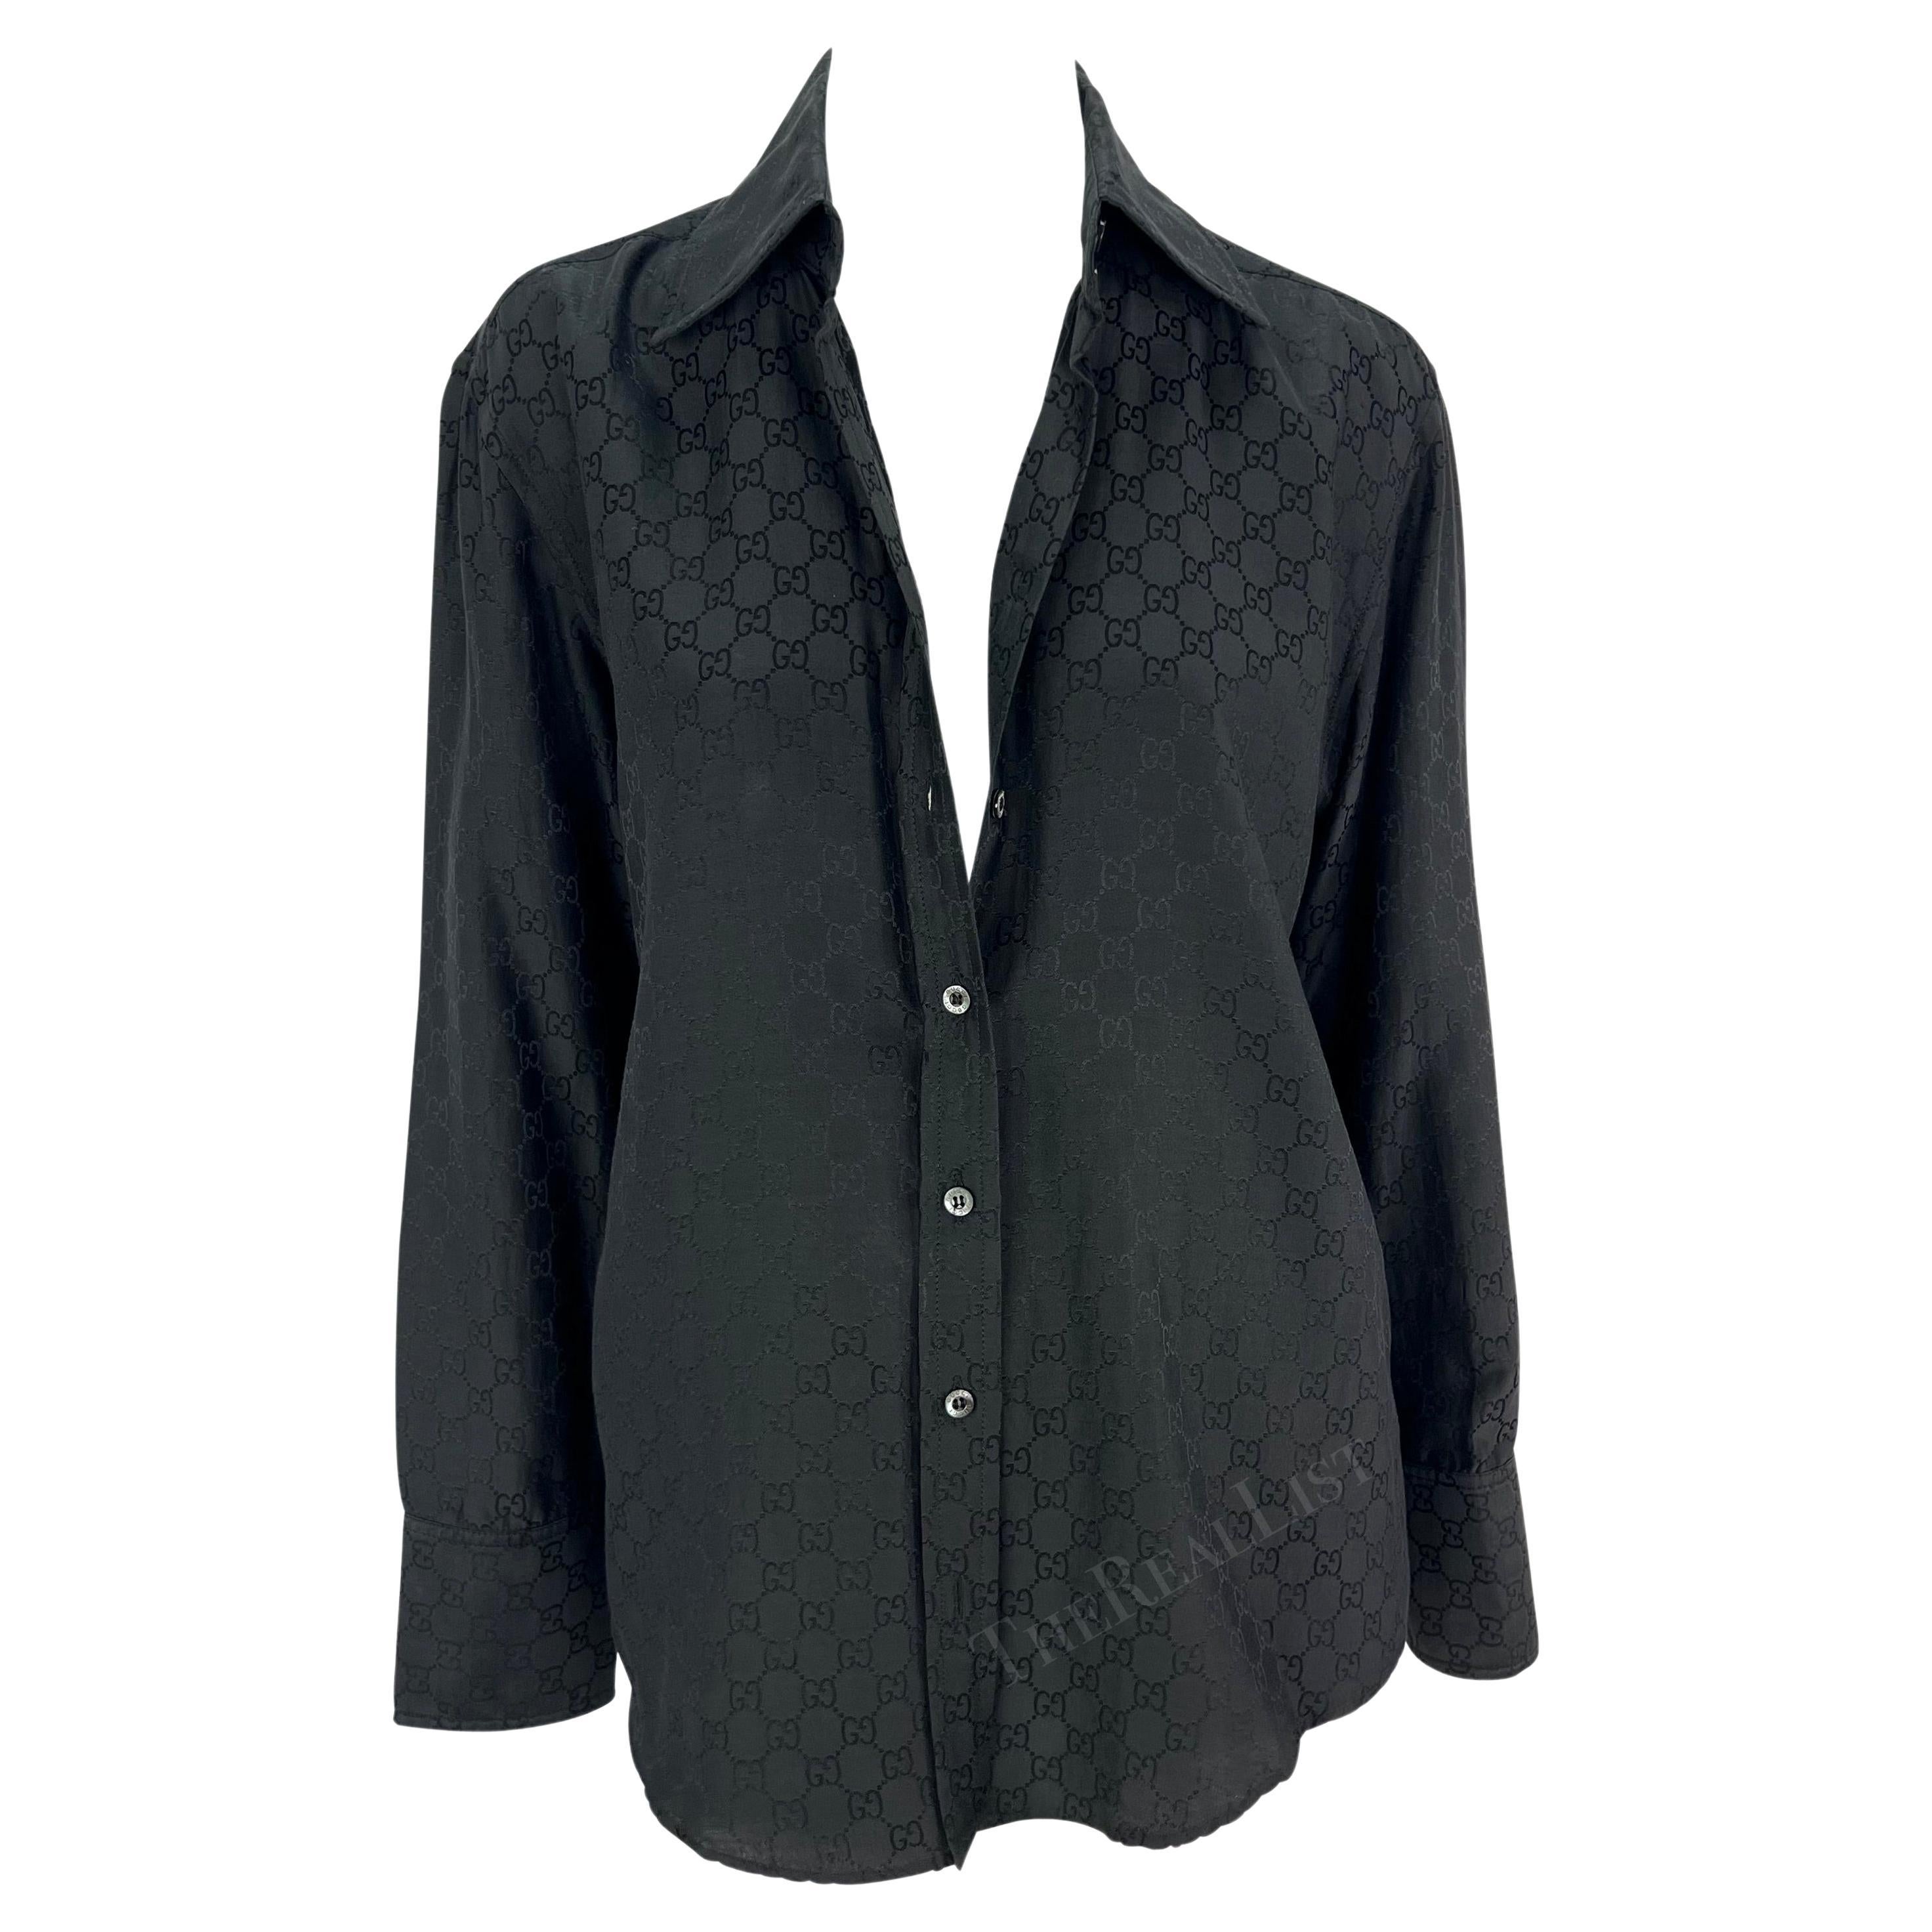 S/S 1998 Gucci by Tom Ford Black 'GG' Monogram Button Down Collar Shirt For Sale